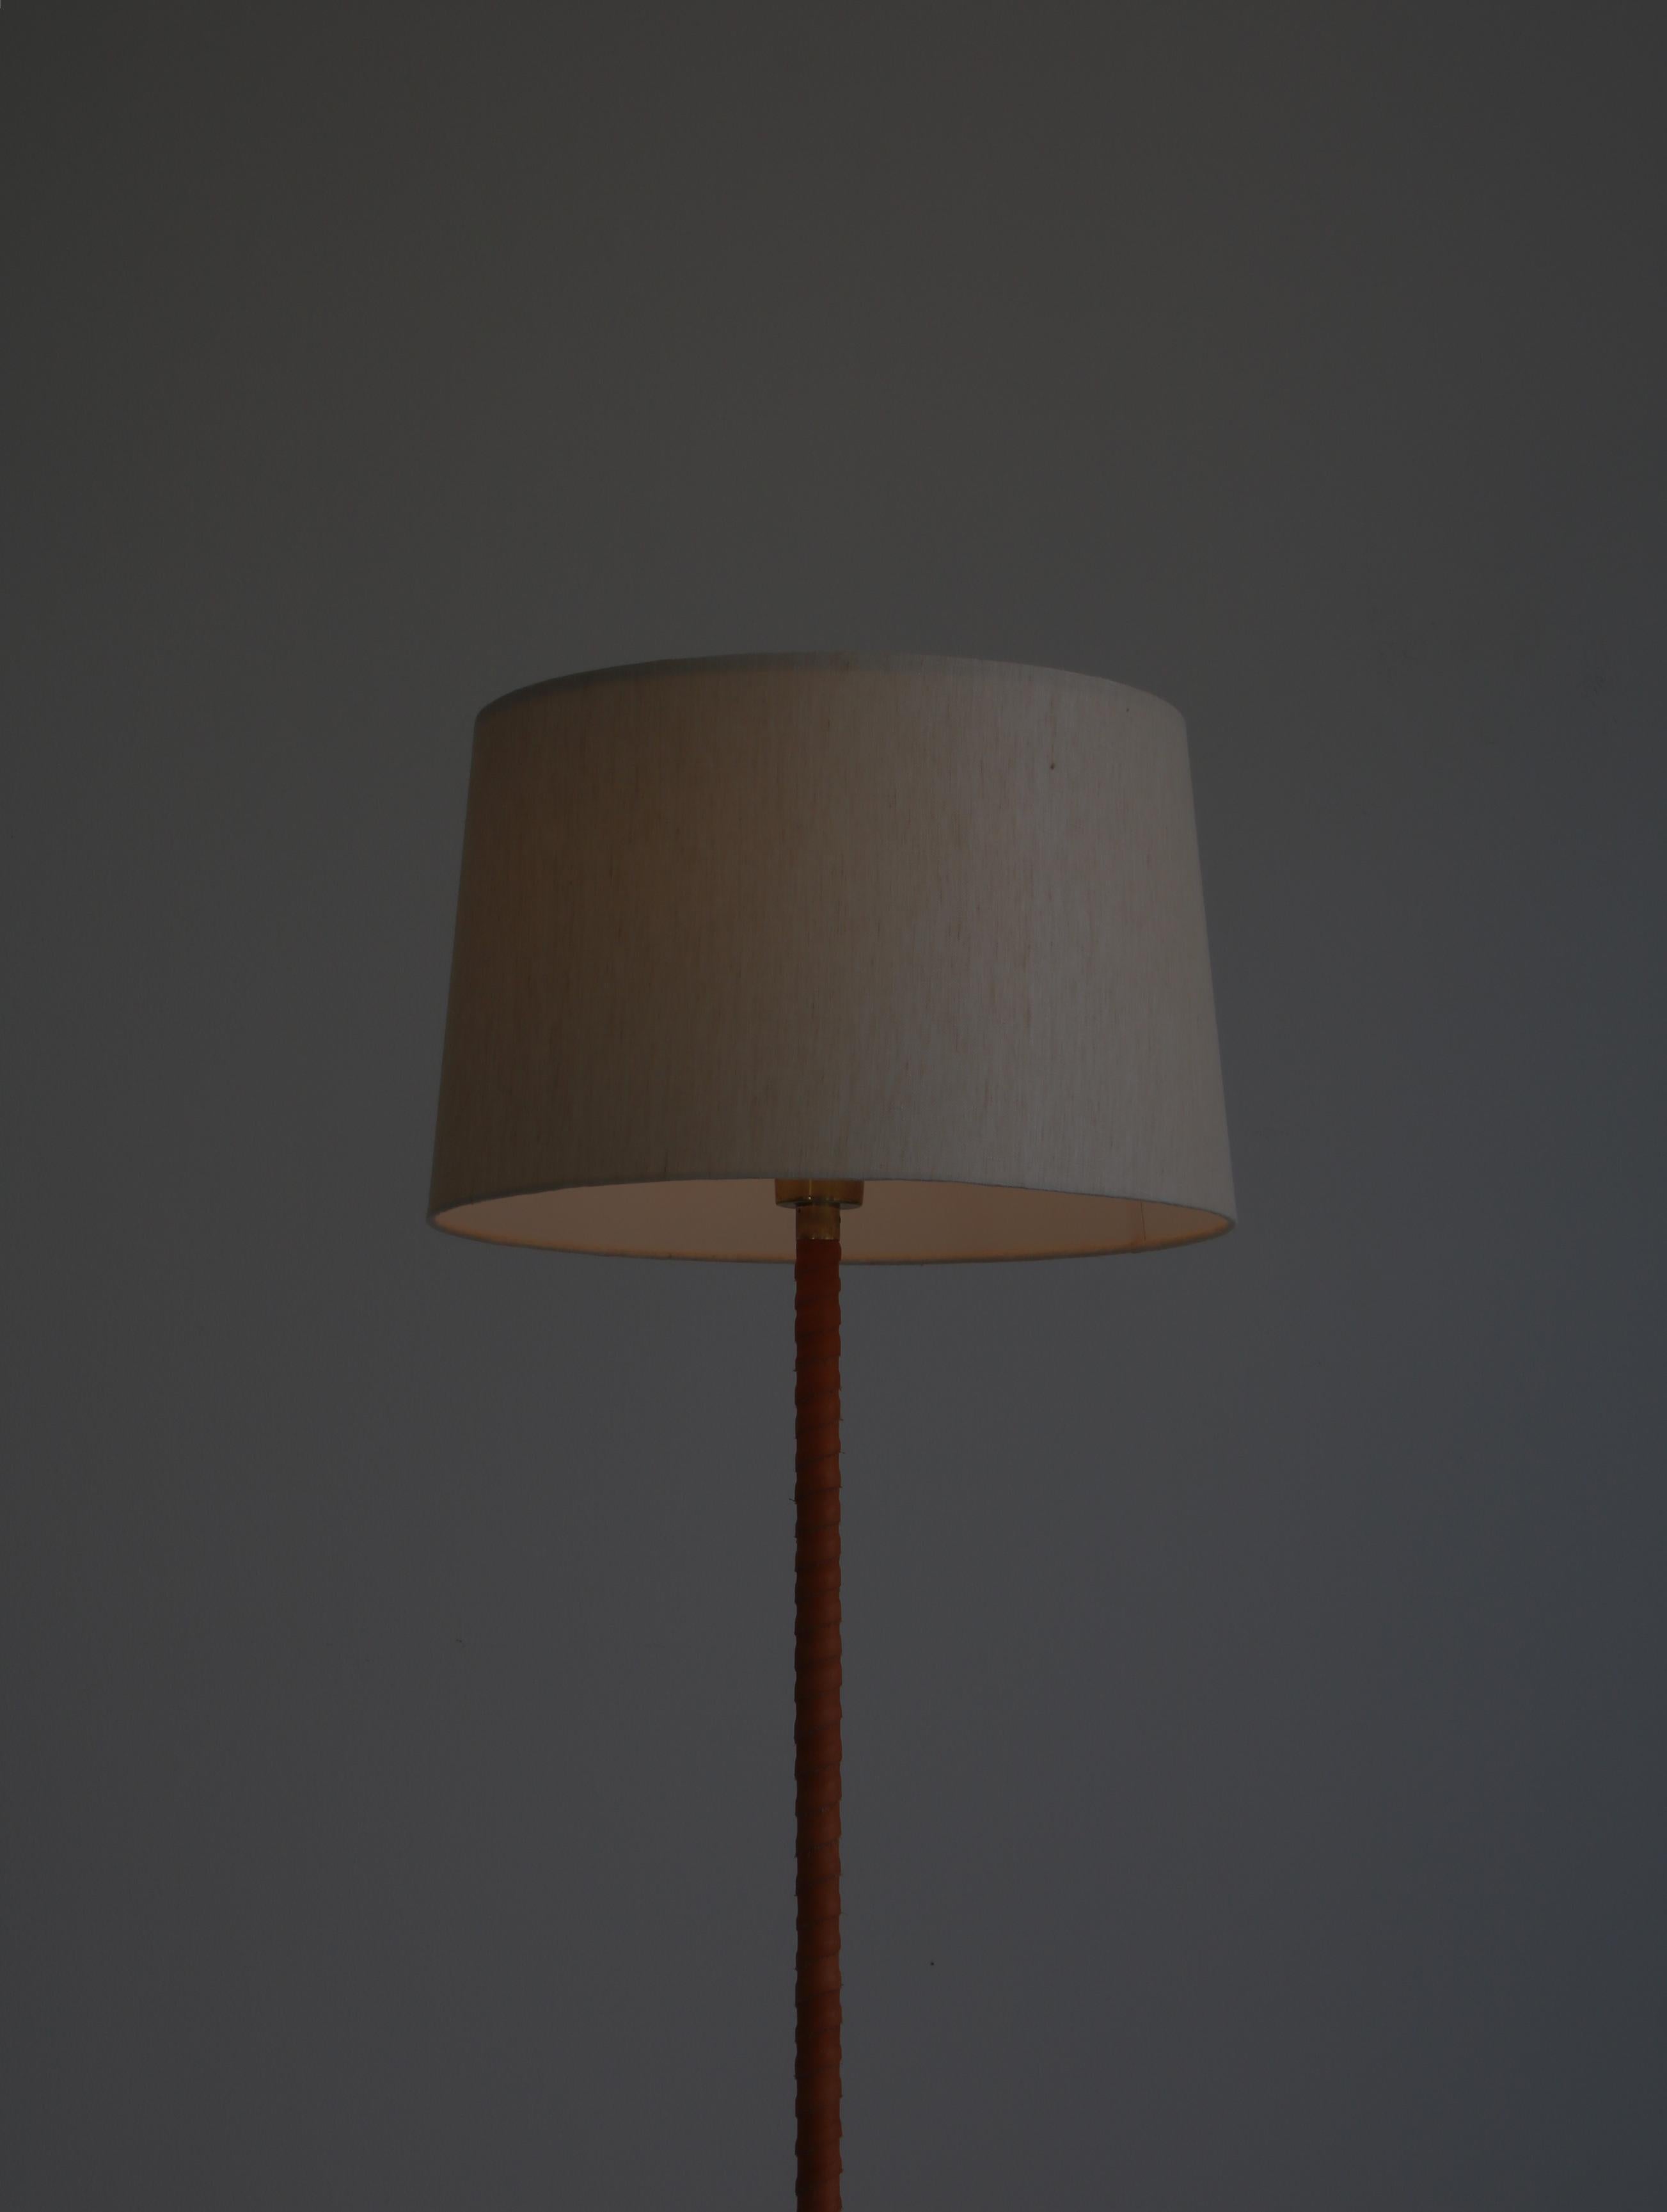 Scandinavian Modern 1950s Floor Lamp by Lisa Johansson-Pape in Brass and Leather for ORNO, Finland